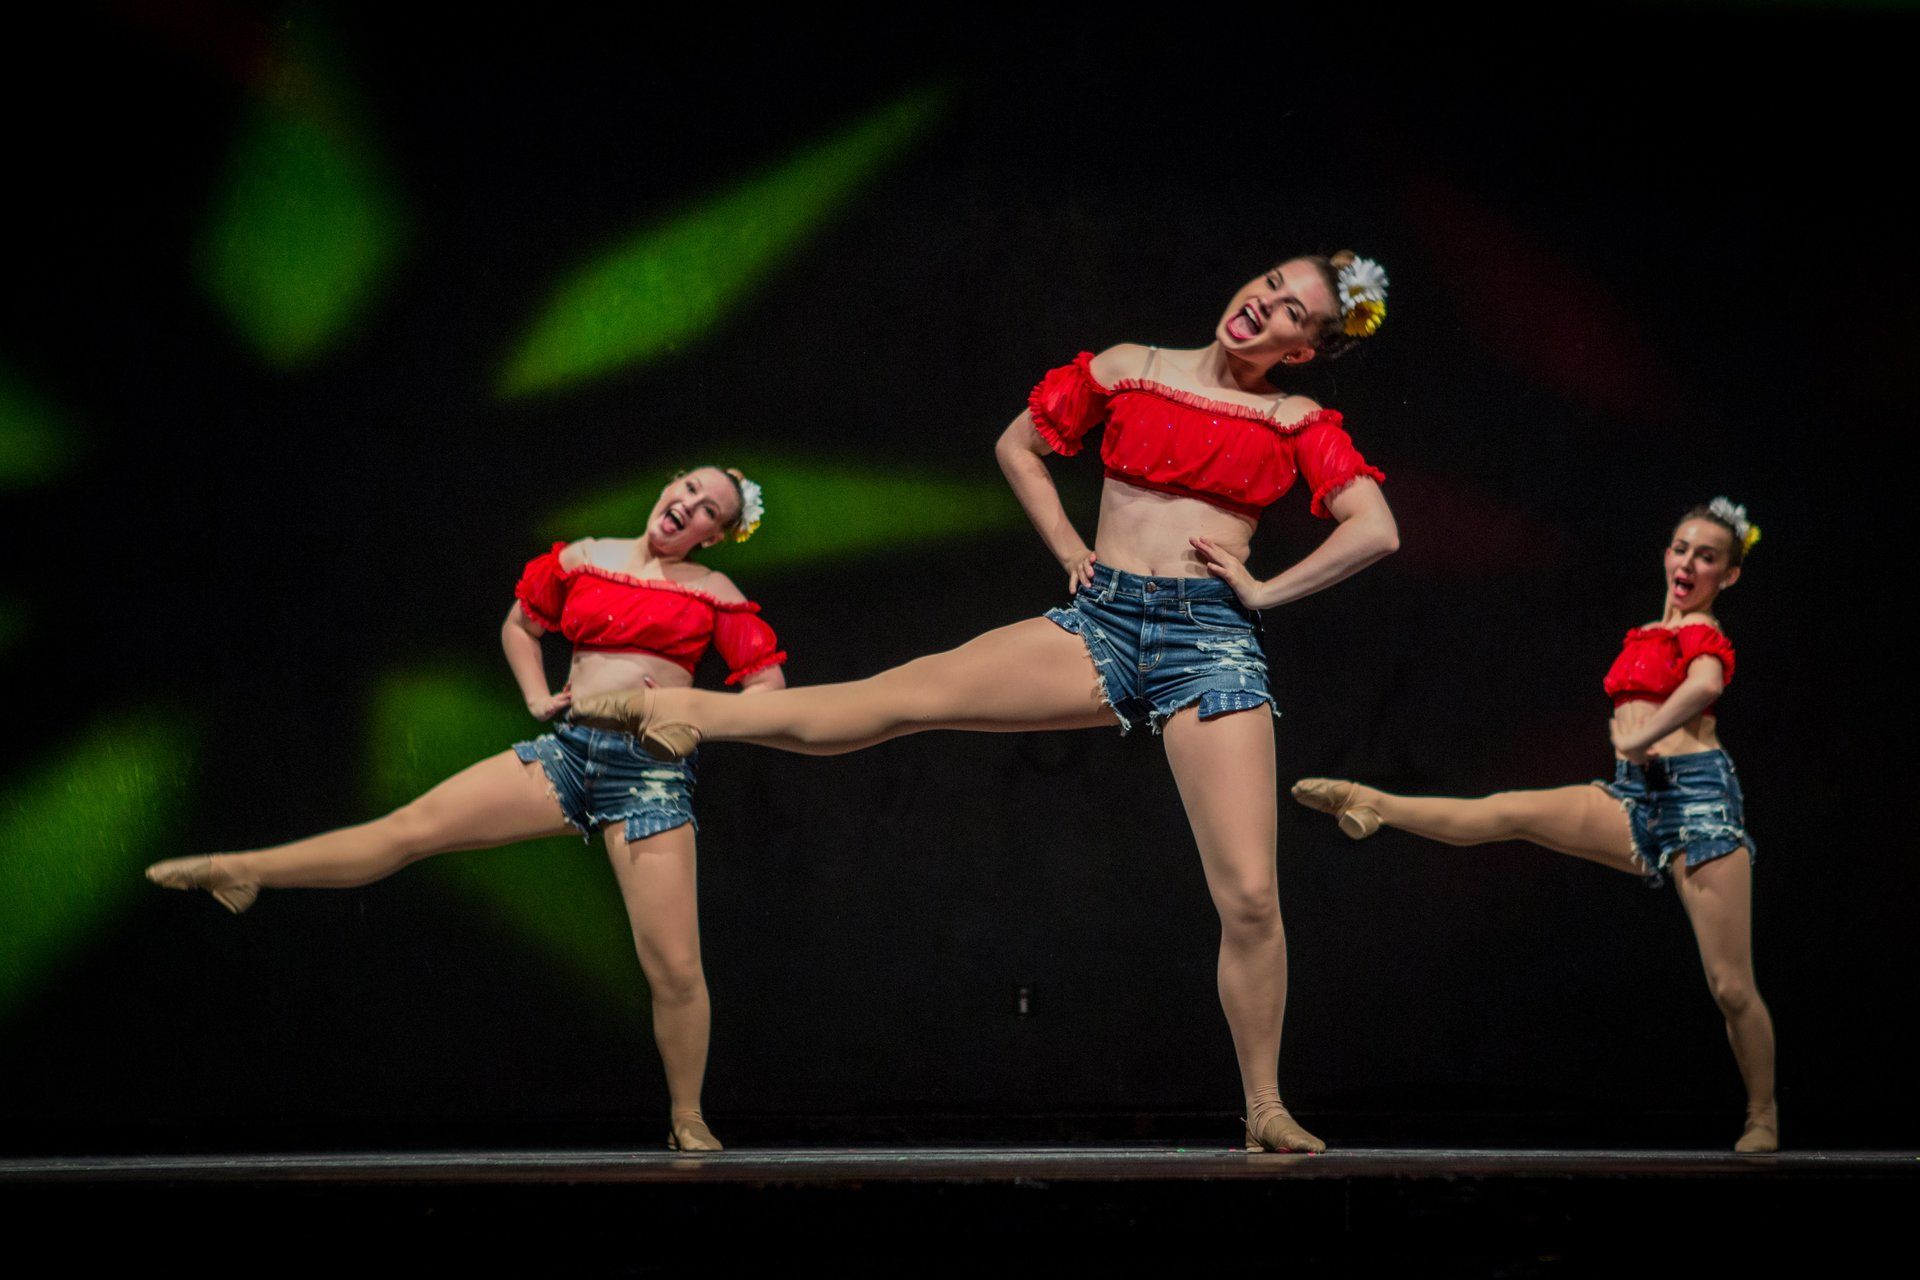 Two Dancers at Dance Expression dance arts